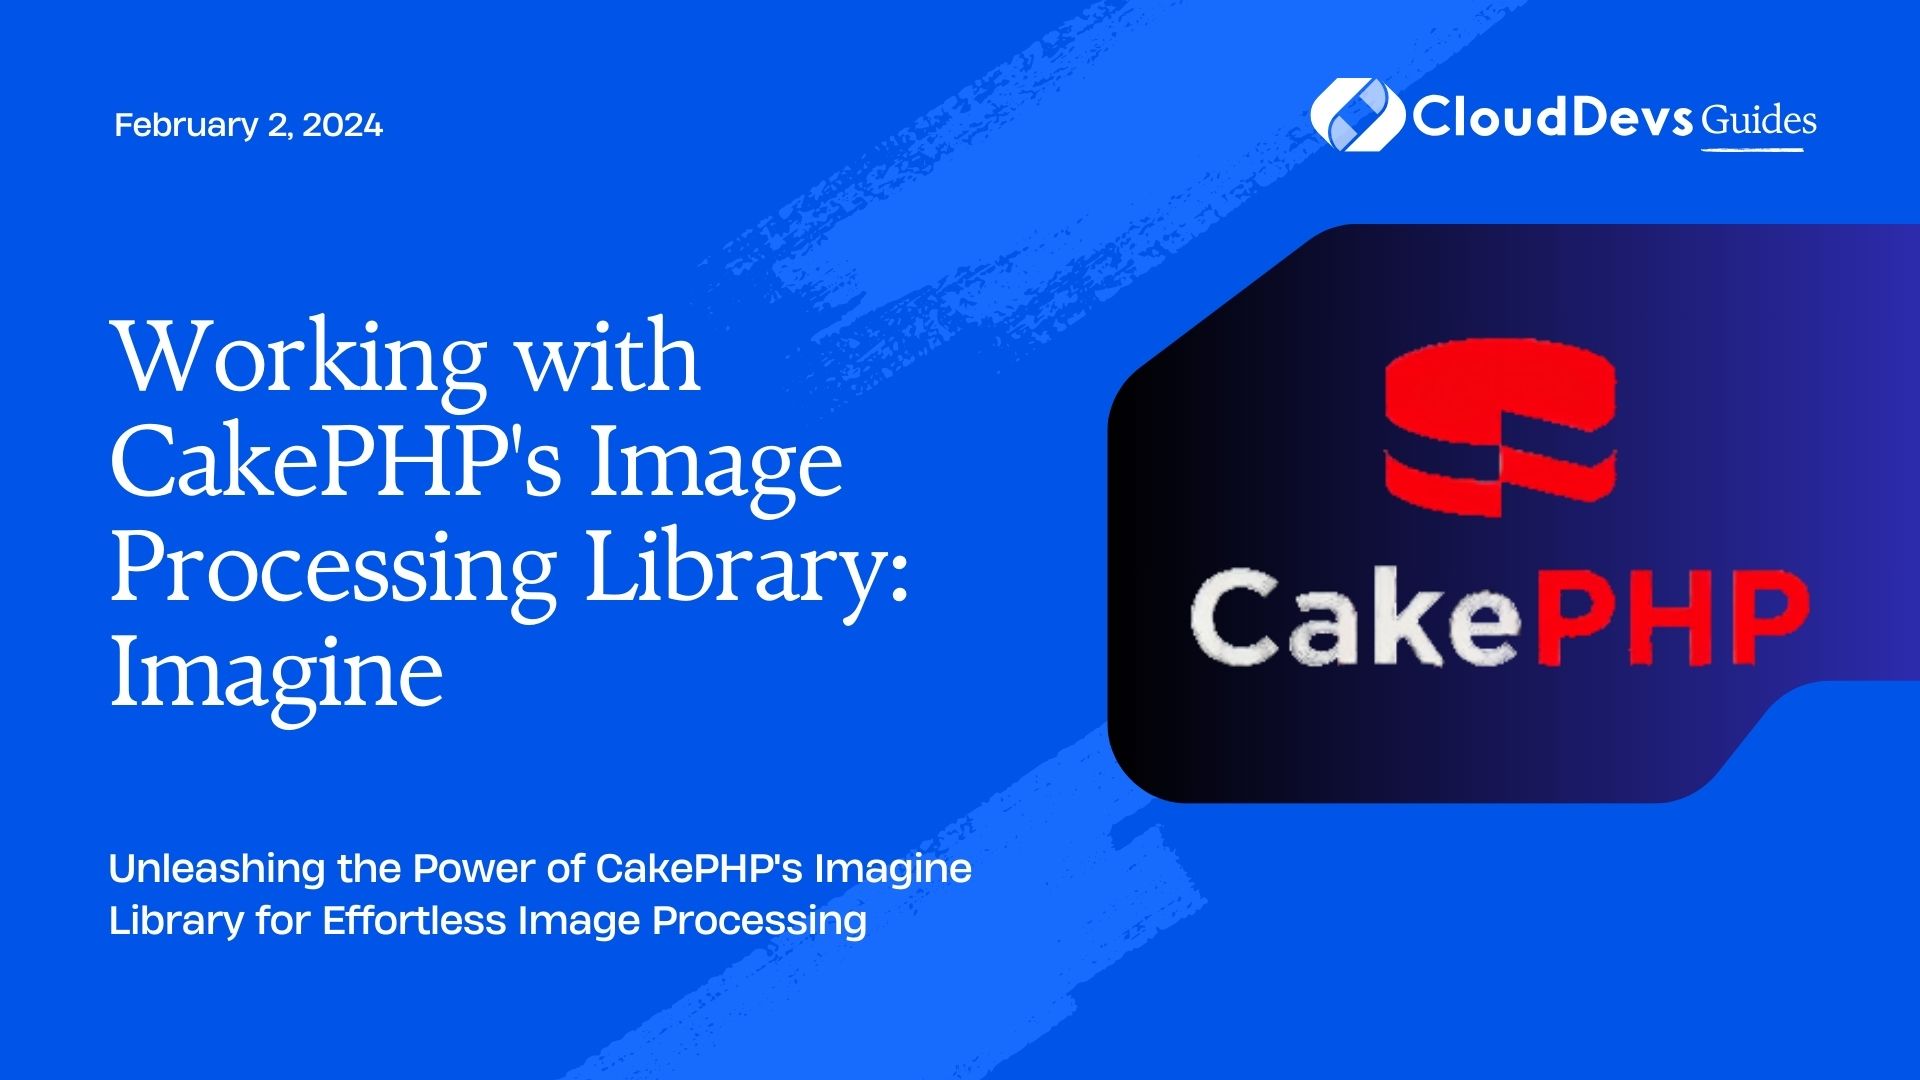 Working with CakePHP's Image Processing Library: Imagine